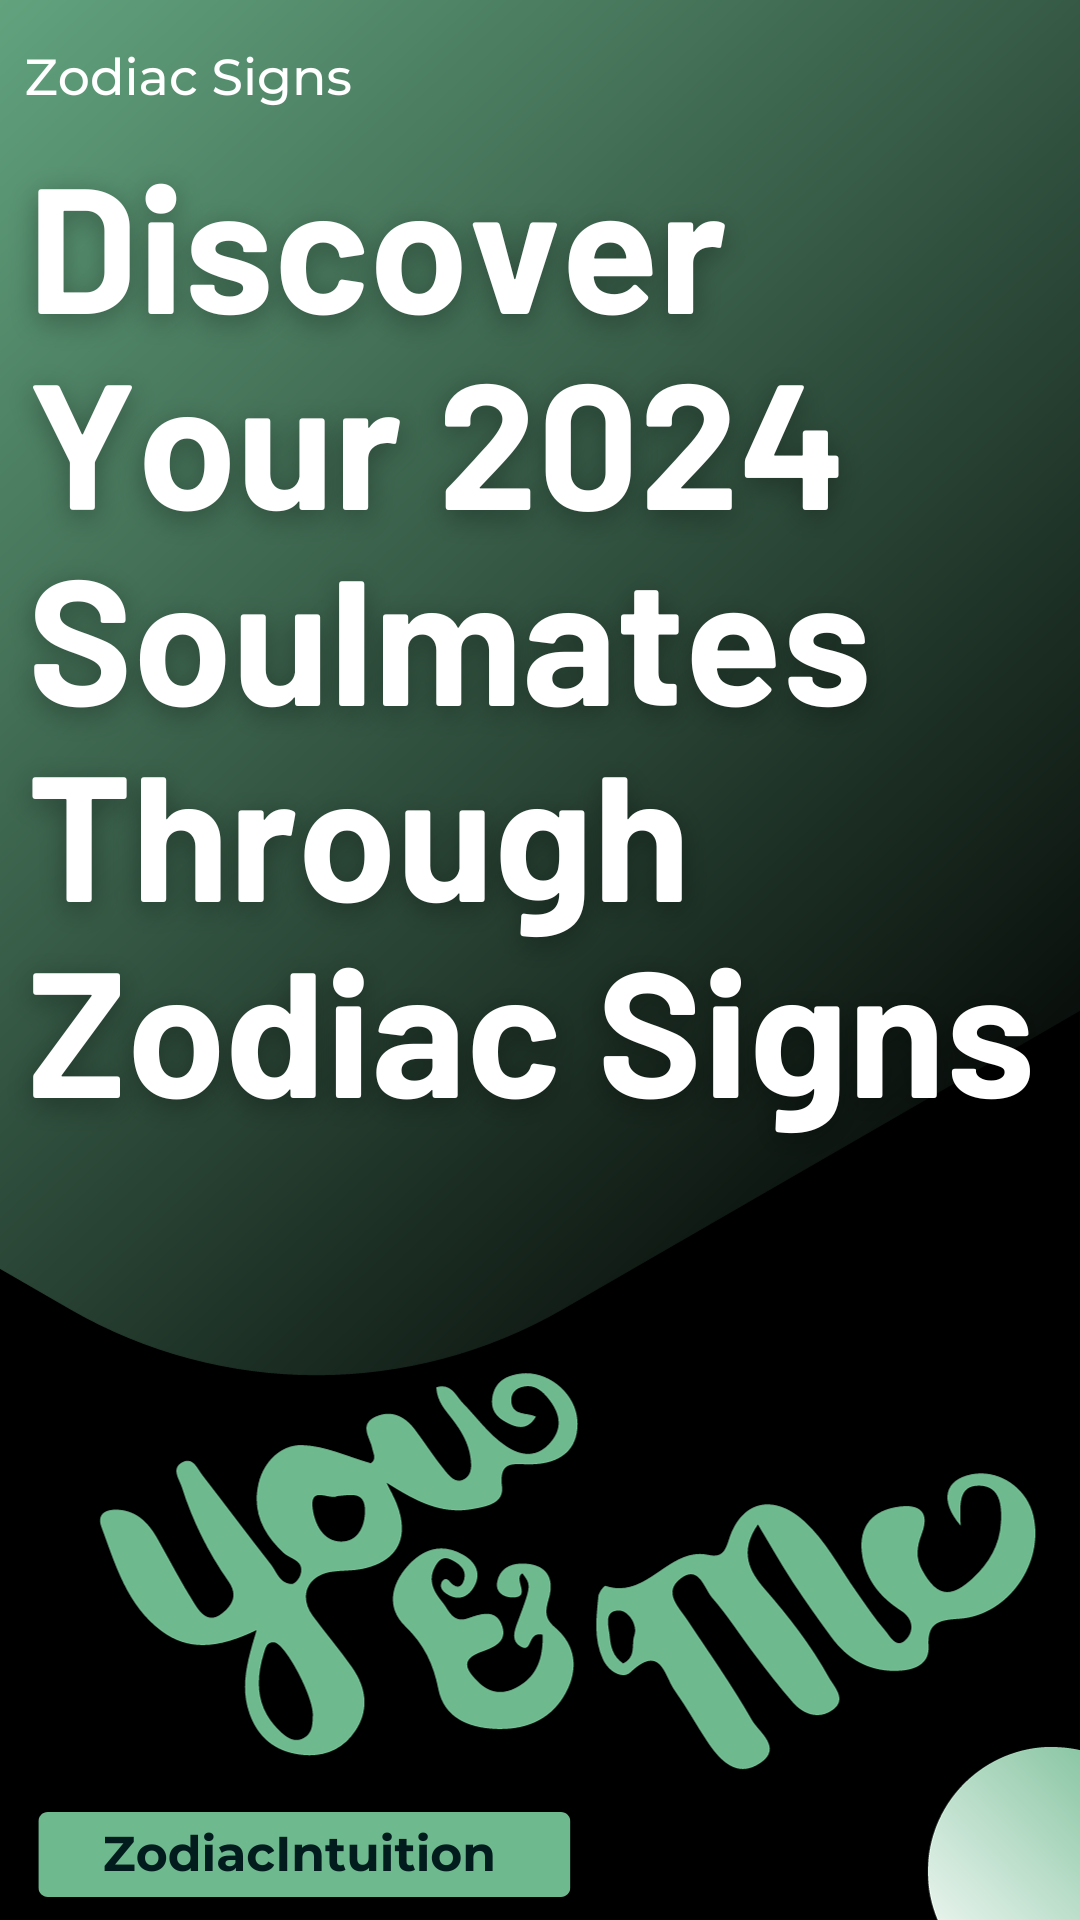 Discover Your 2024 Soulmates Through Zodiac Signs